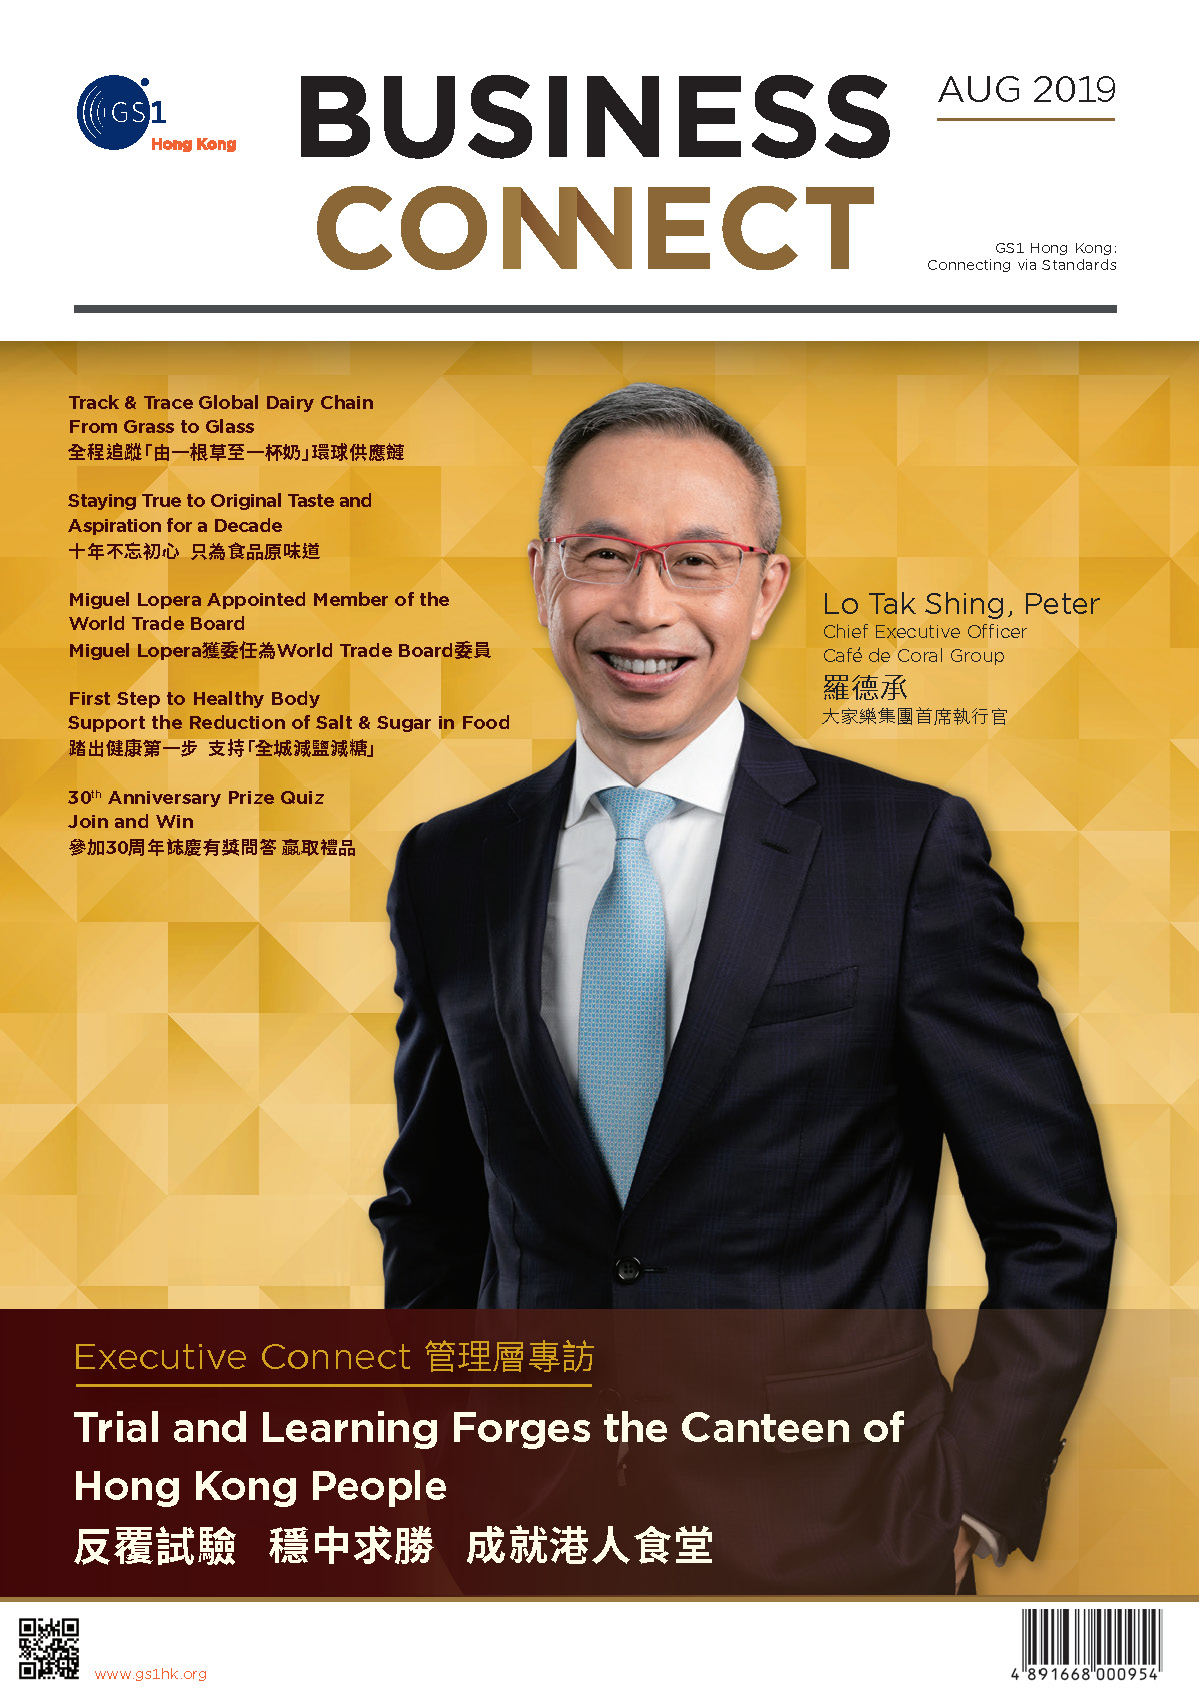 Business Connect Aug 2019